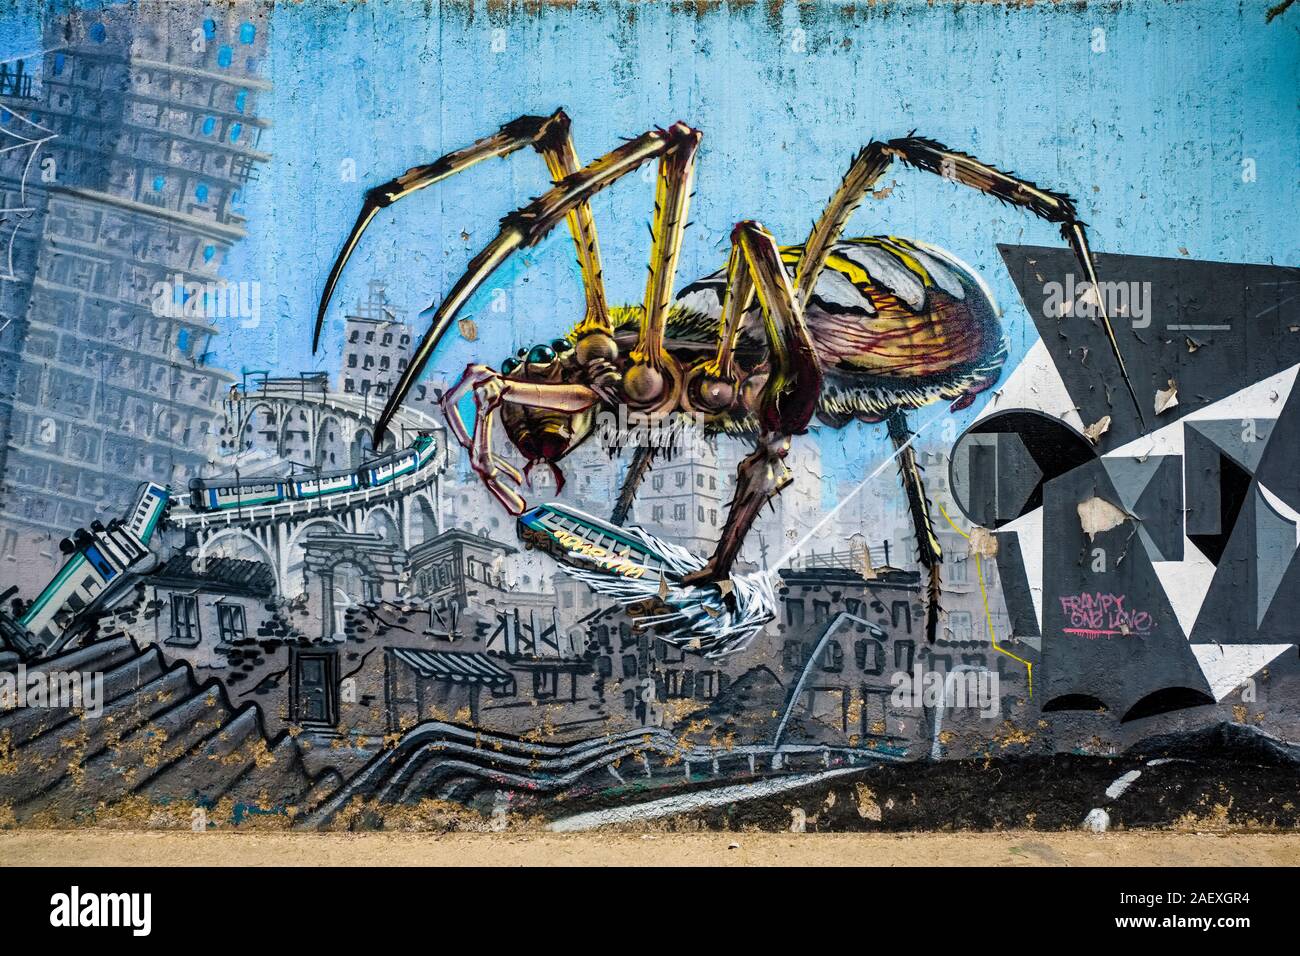 Colorful graffiti of an insect destroying a city sprayed onto a wall Stock Photo